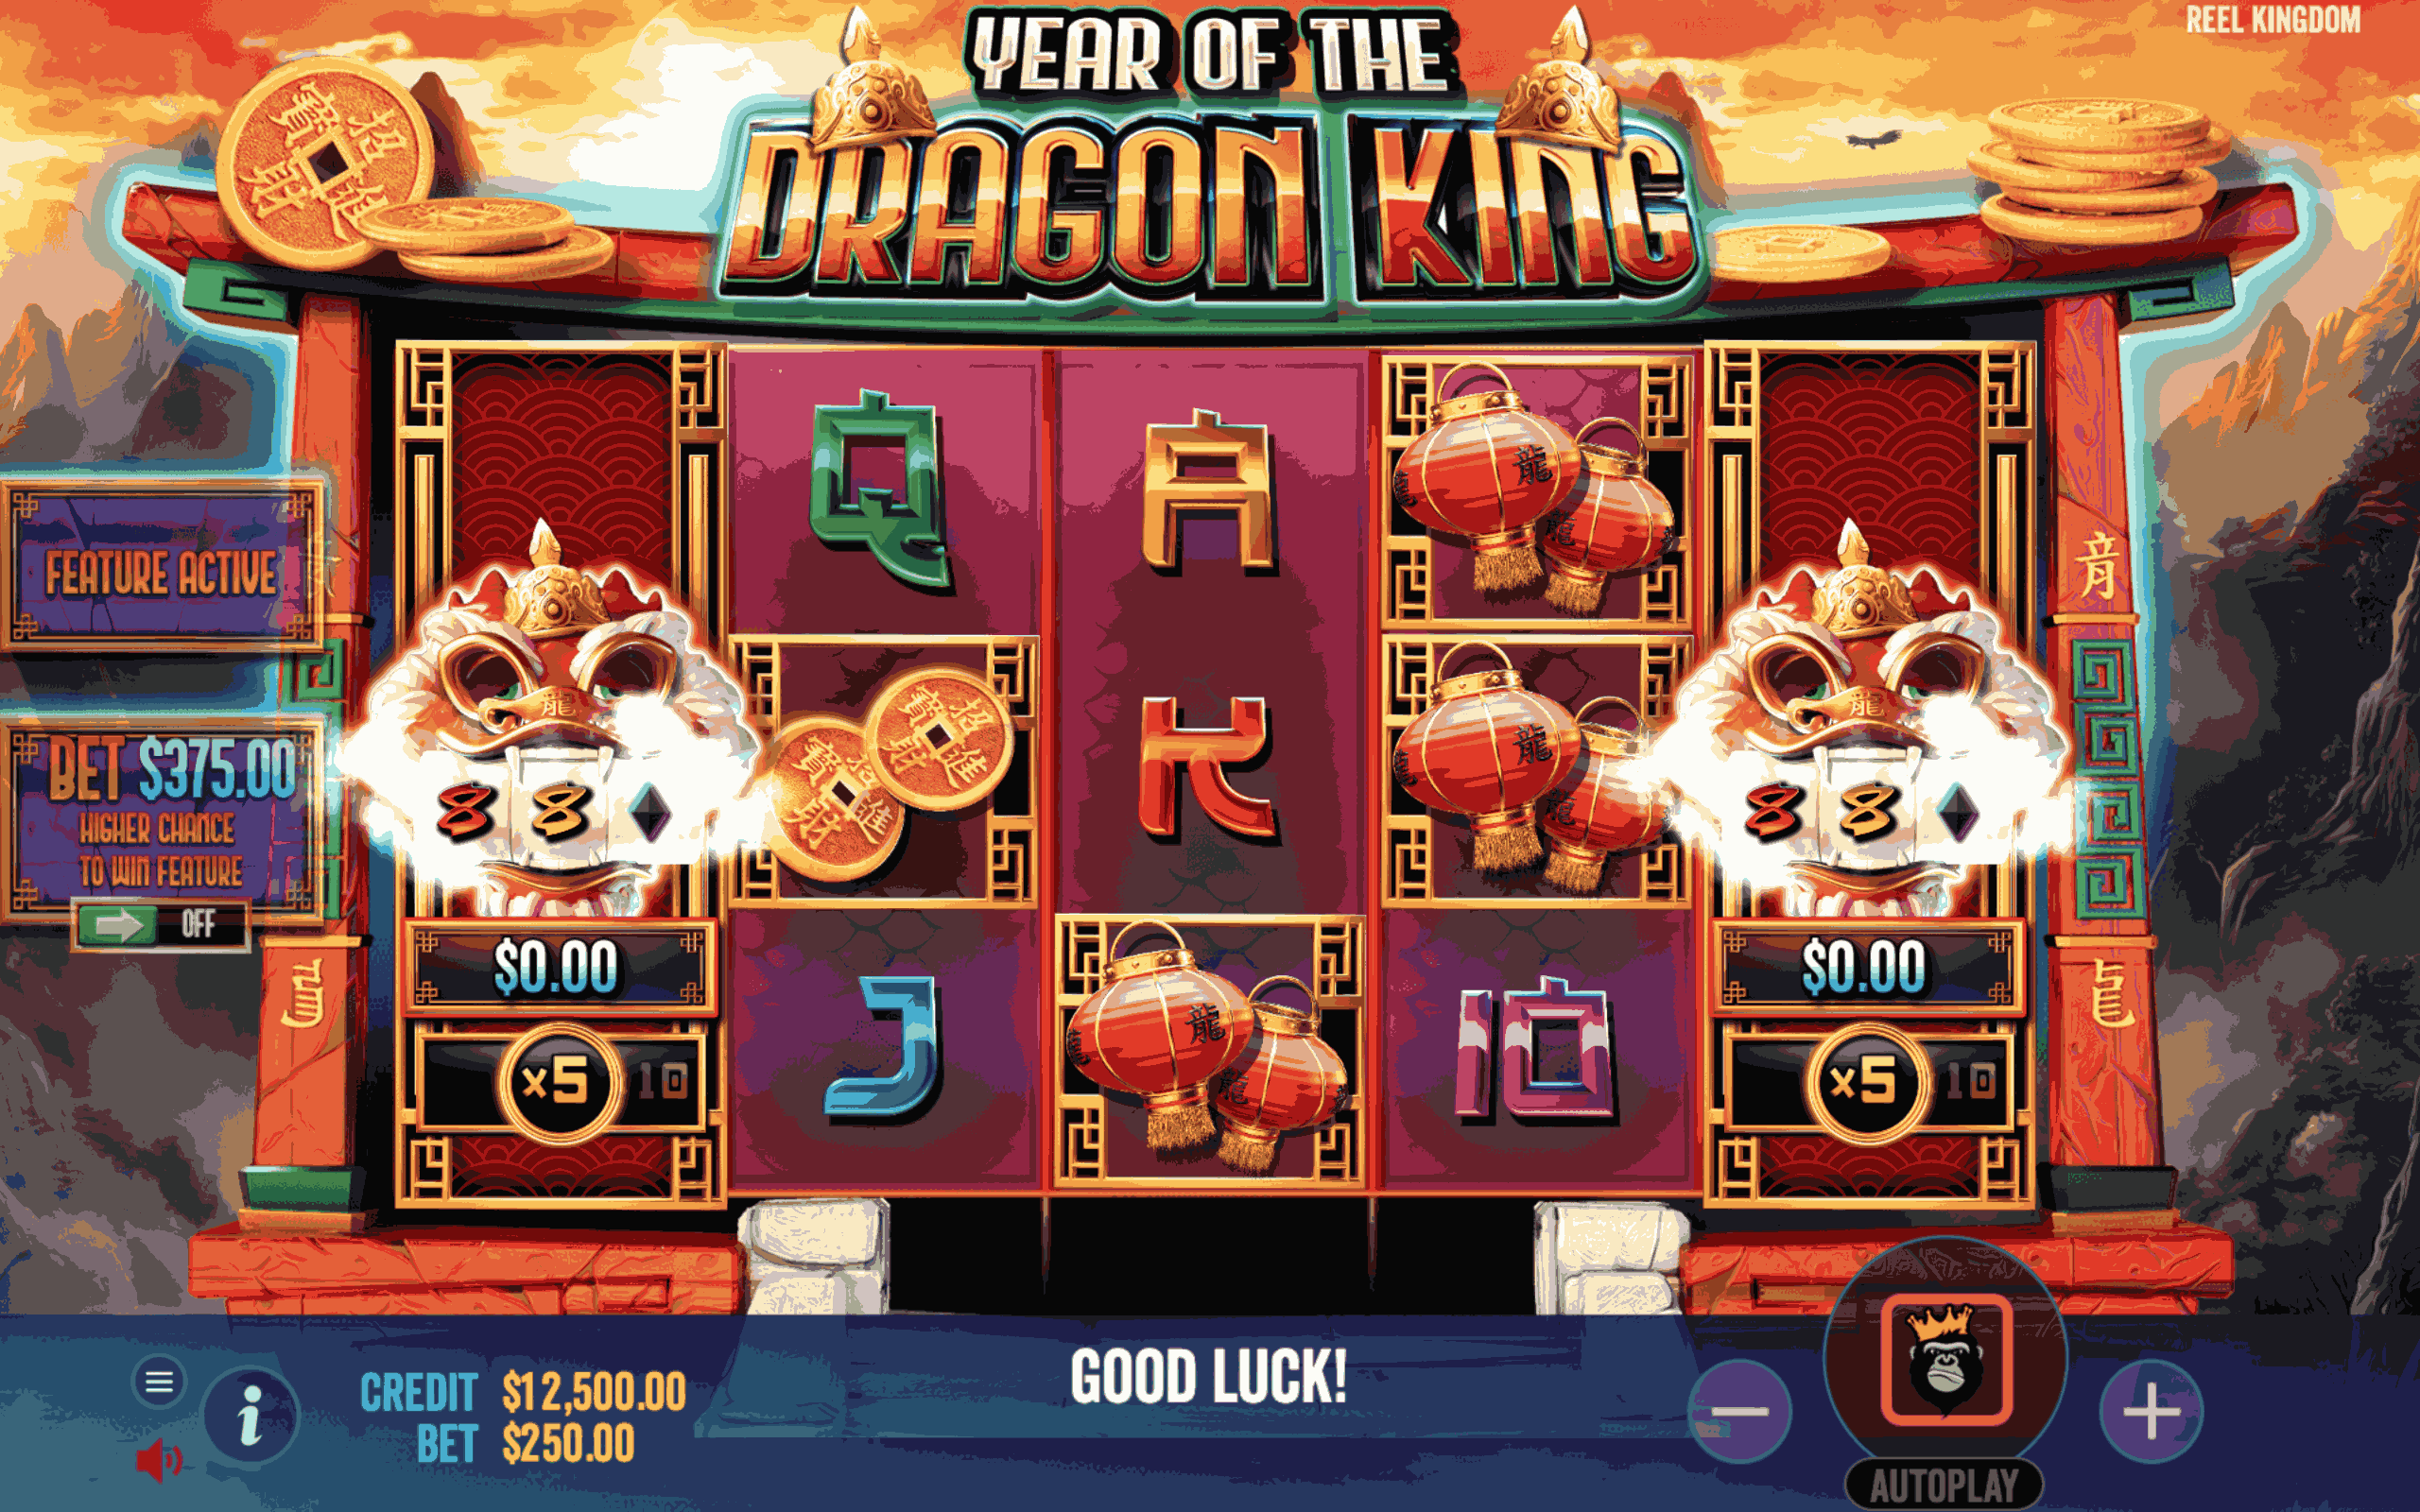 Year of the Dragon King Slot - 2